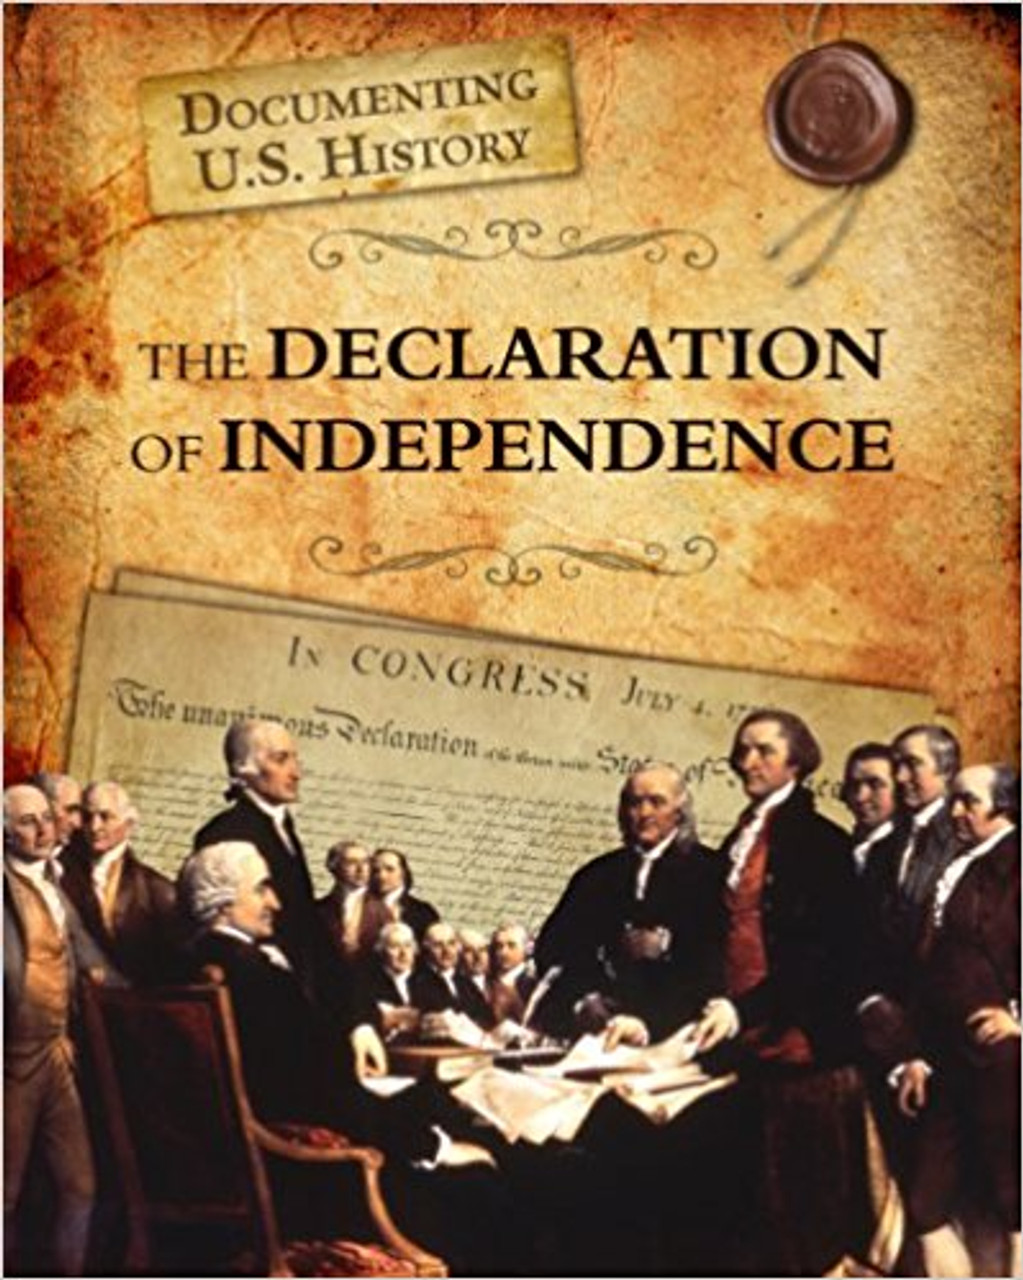 The Declaration of Independence by Elizabeth Raum